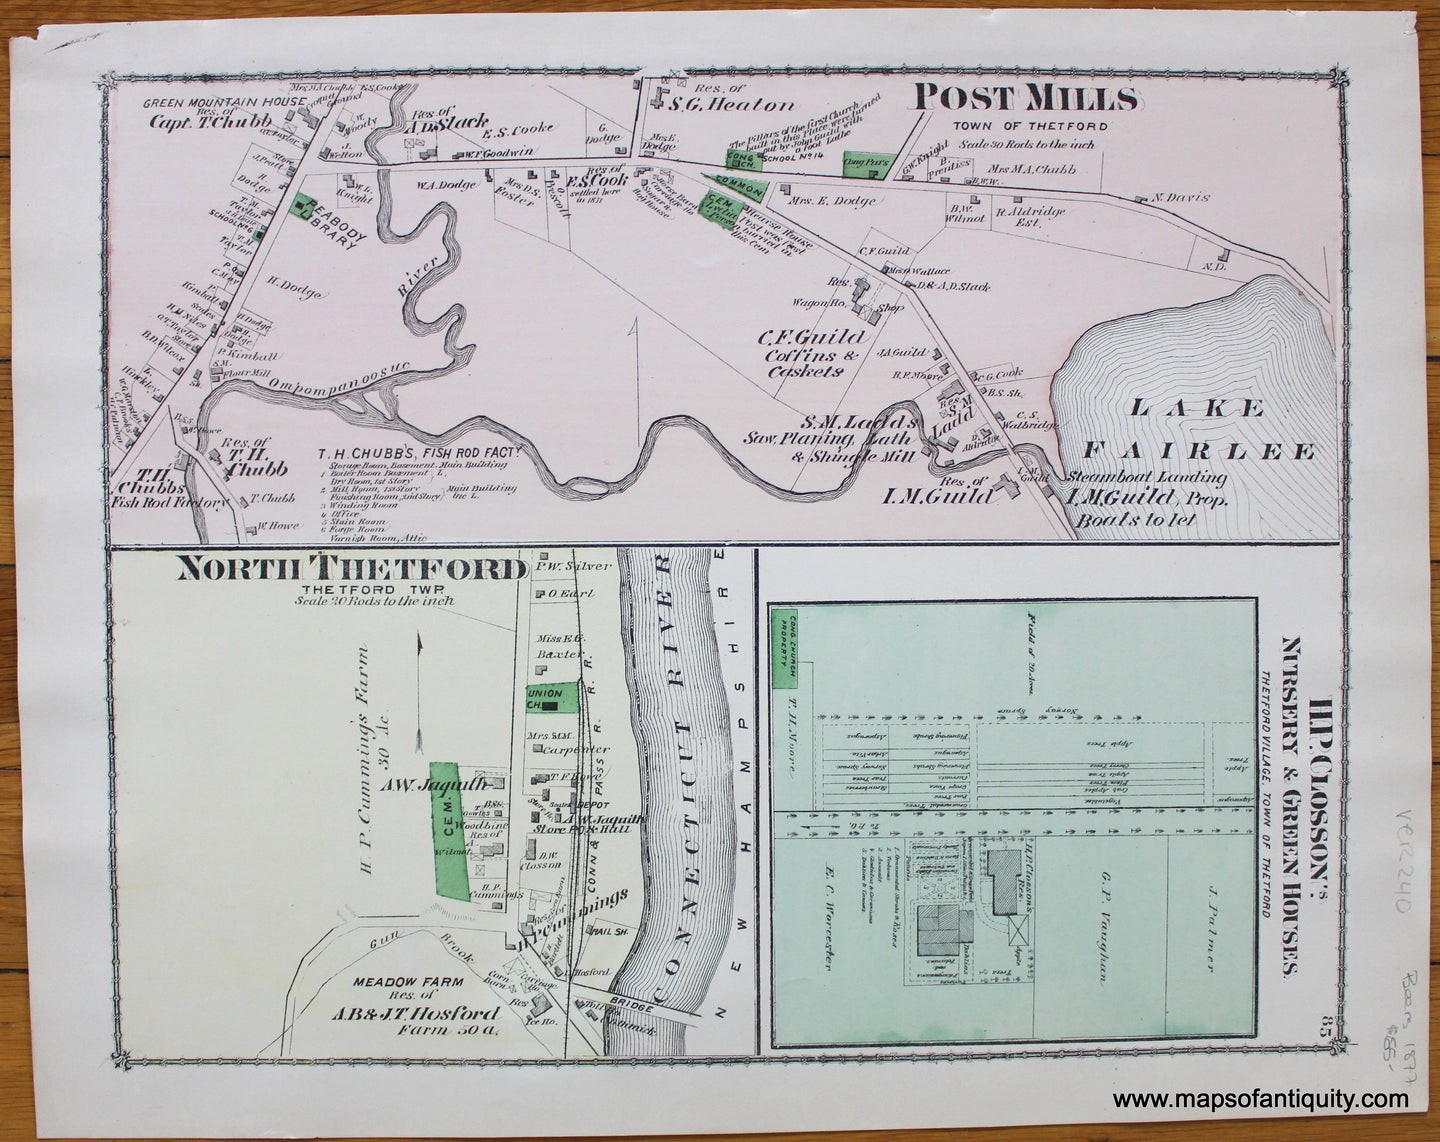 Post-Mills-H.P.-Glosson's-Nursery-&-Green-Houses-North-Thetford-1877-Beers-Antique-Map-Vermont-Orange-County-1870s-1800s-19th-century-Maps-of-Antiquity